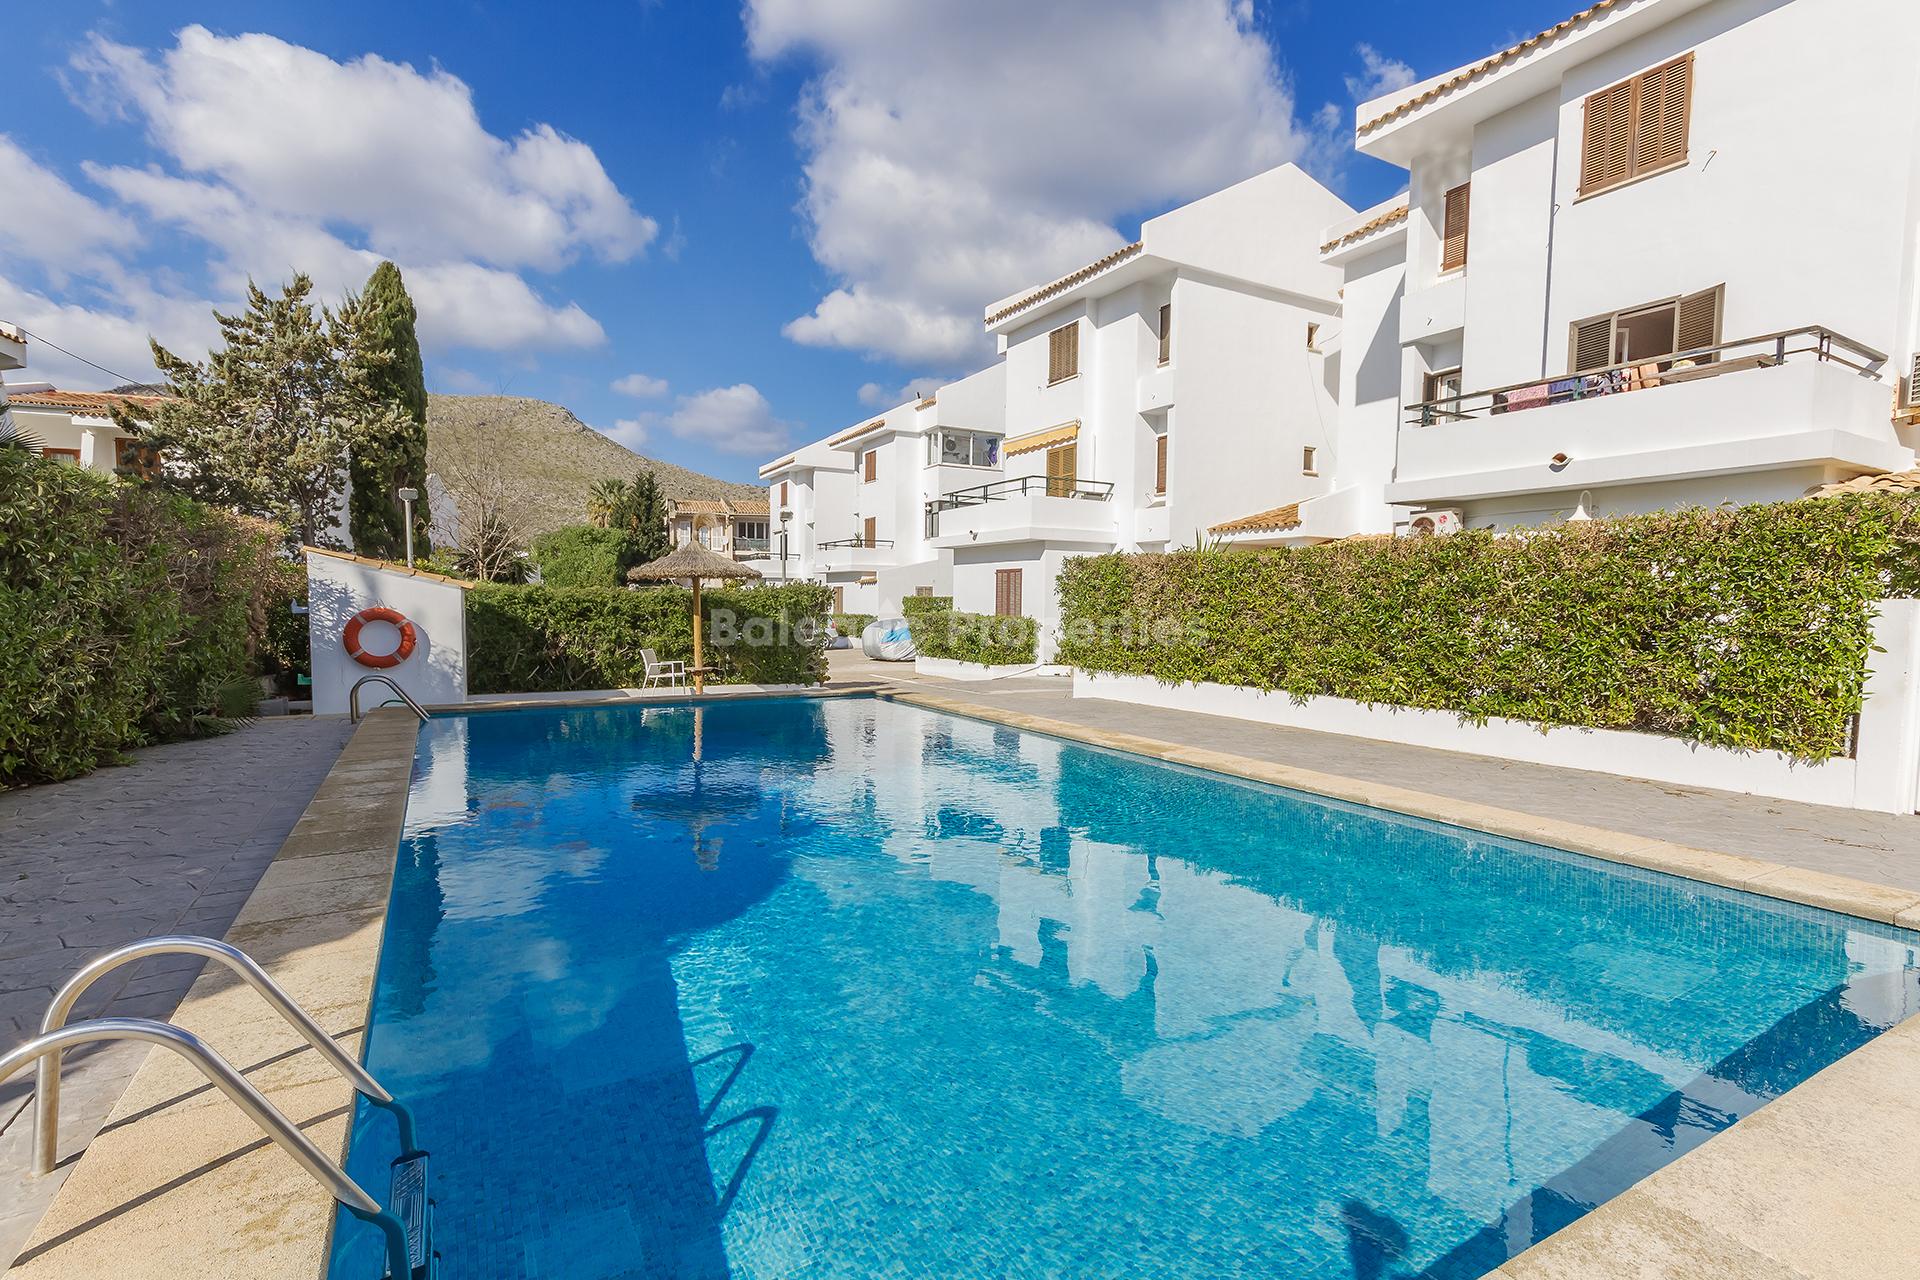 Fantastic garden apartment with community pool for sale in Puerto Pollensa, Mallorca